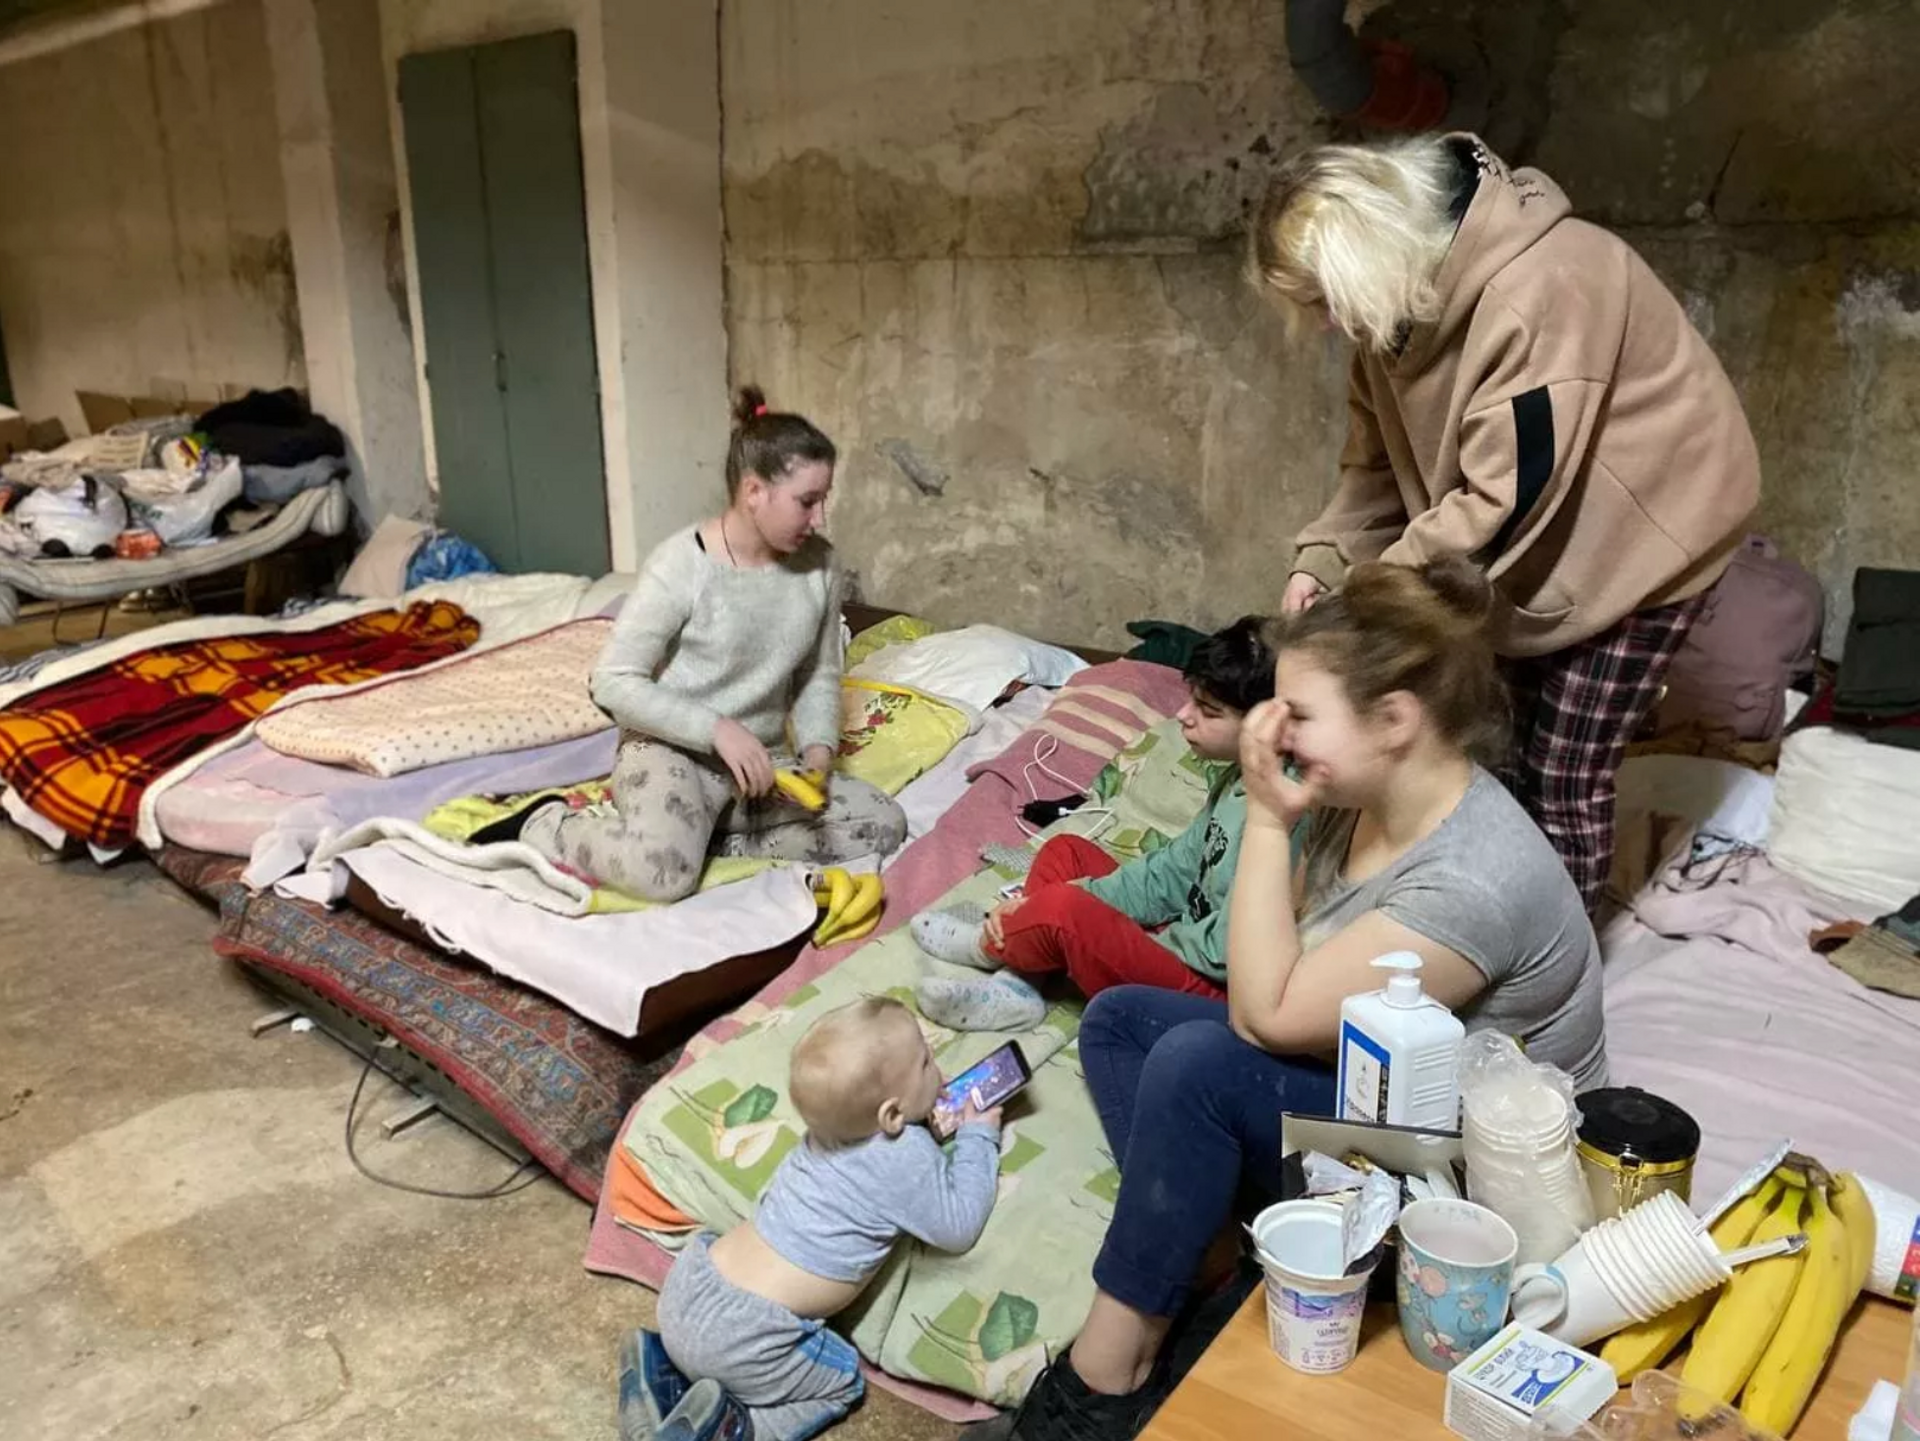 Patients on makeshift beds in Ohmatdyt hospital basement